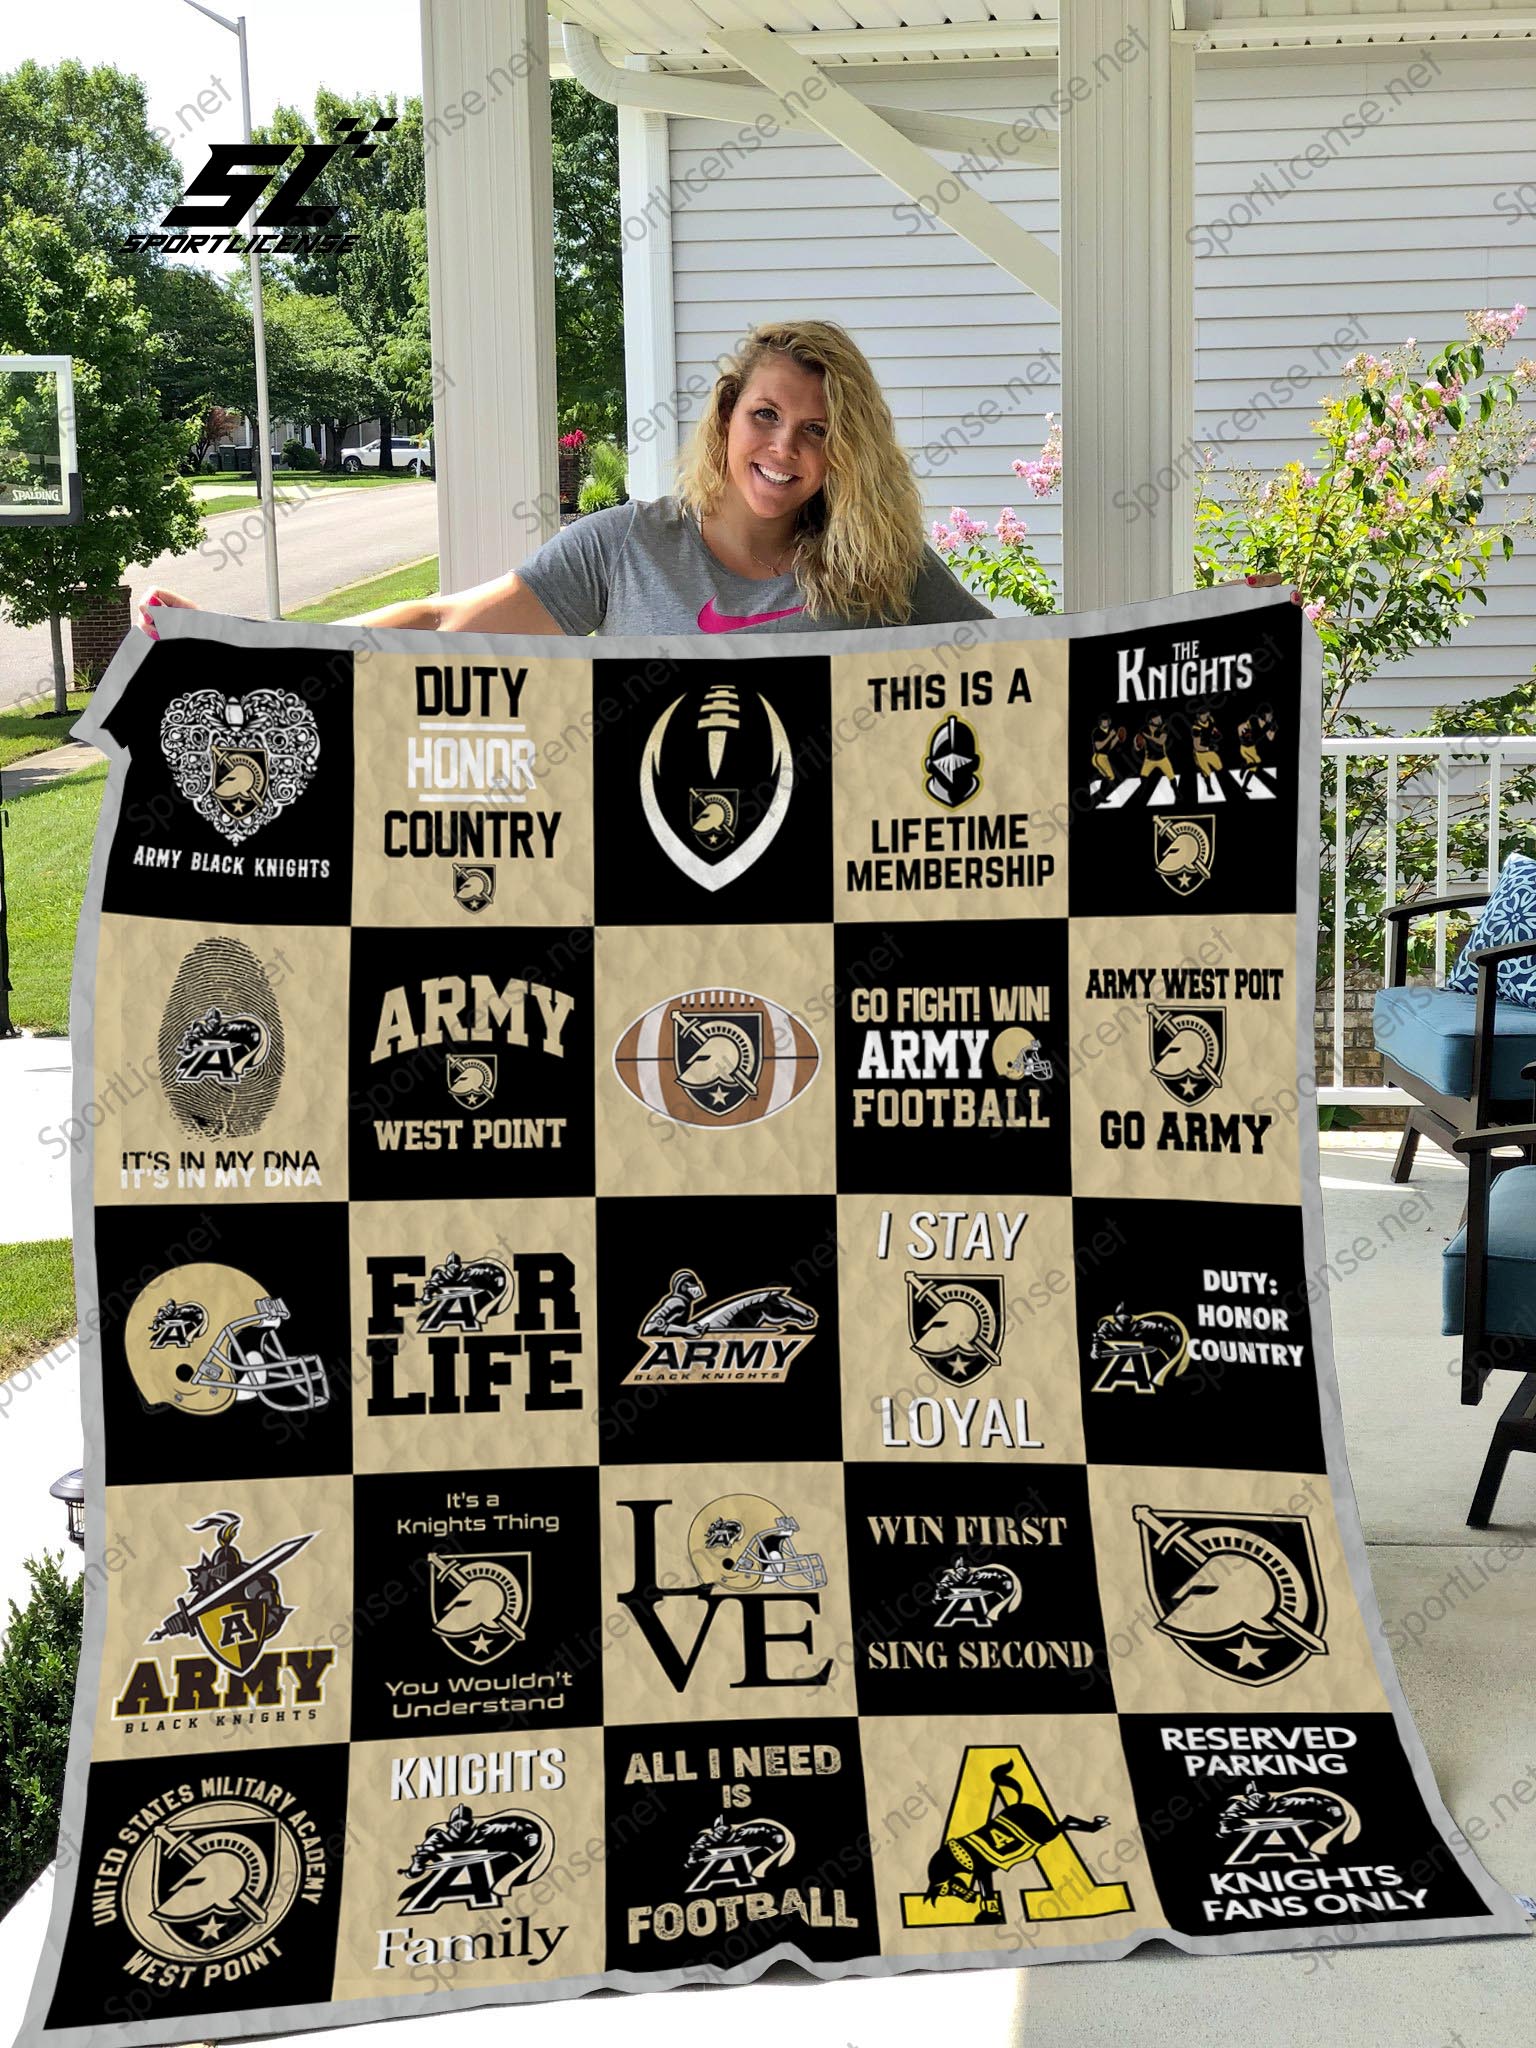 Army west point black knights quilt 3